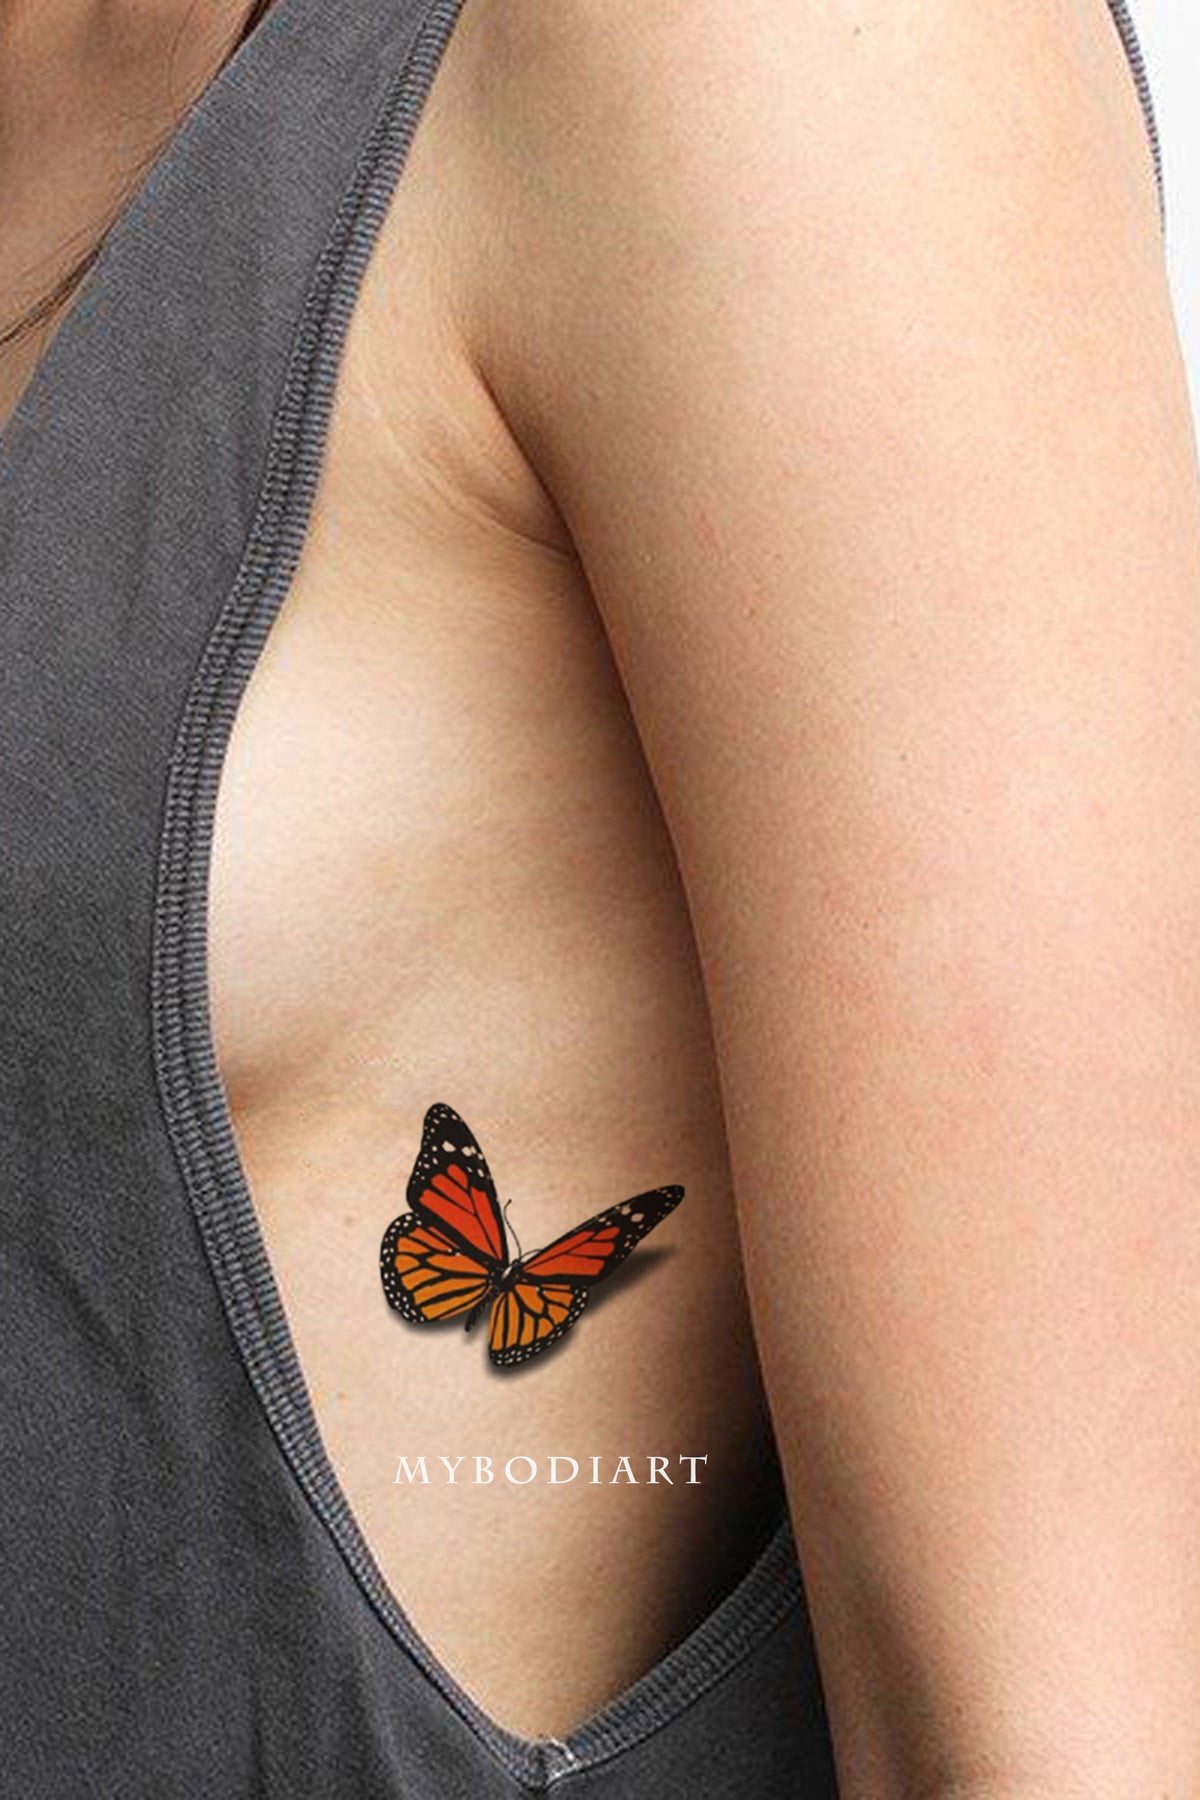 11 Butterfly Rib Tattoo Ideas That Will Blow Your Mind  alexie